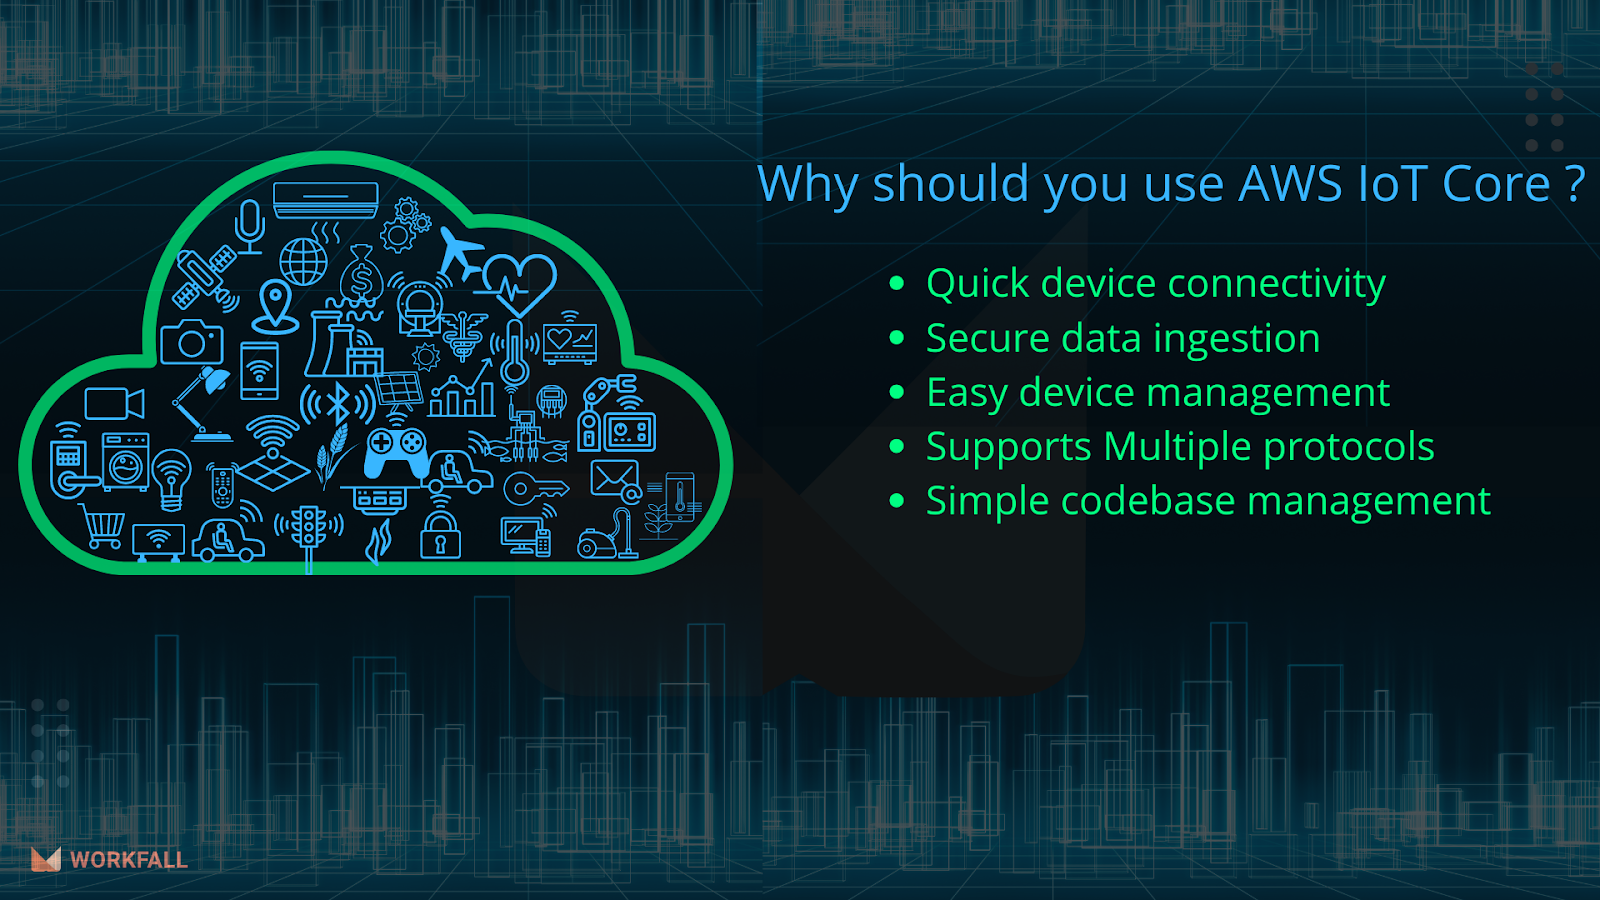 Why use AWS IoT core?